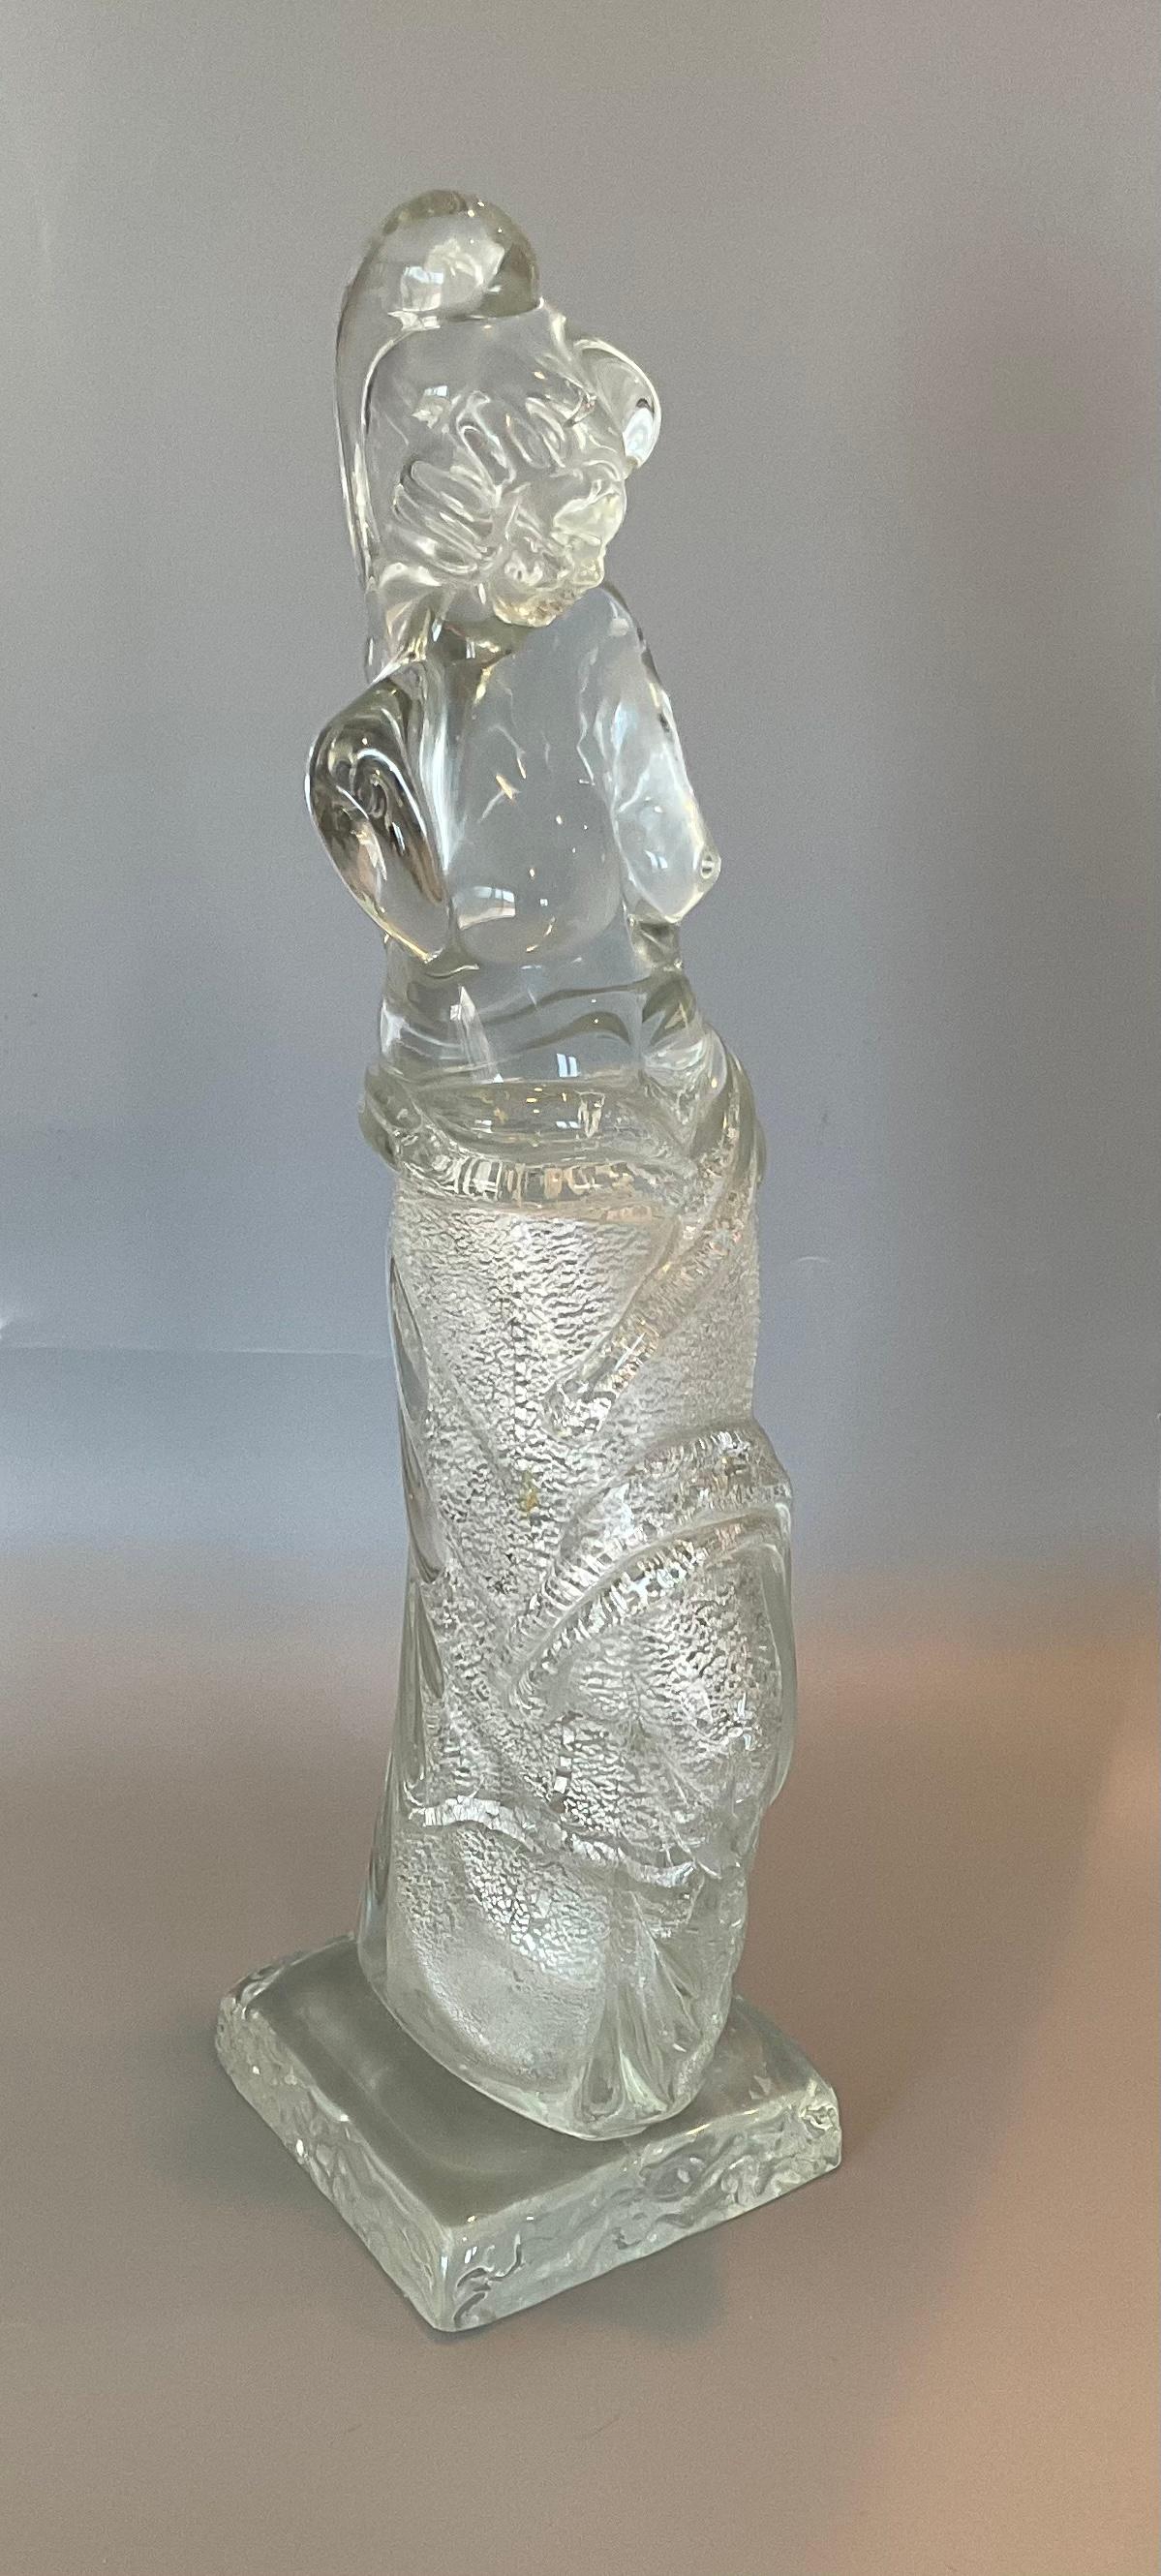 Venus de Milo Murano Art Glass Sculpture by Ermanno Nason with silver encased flakes. Large and impressive sculpture signed by the artist.